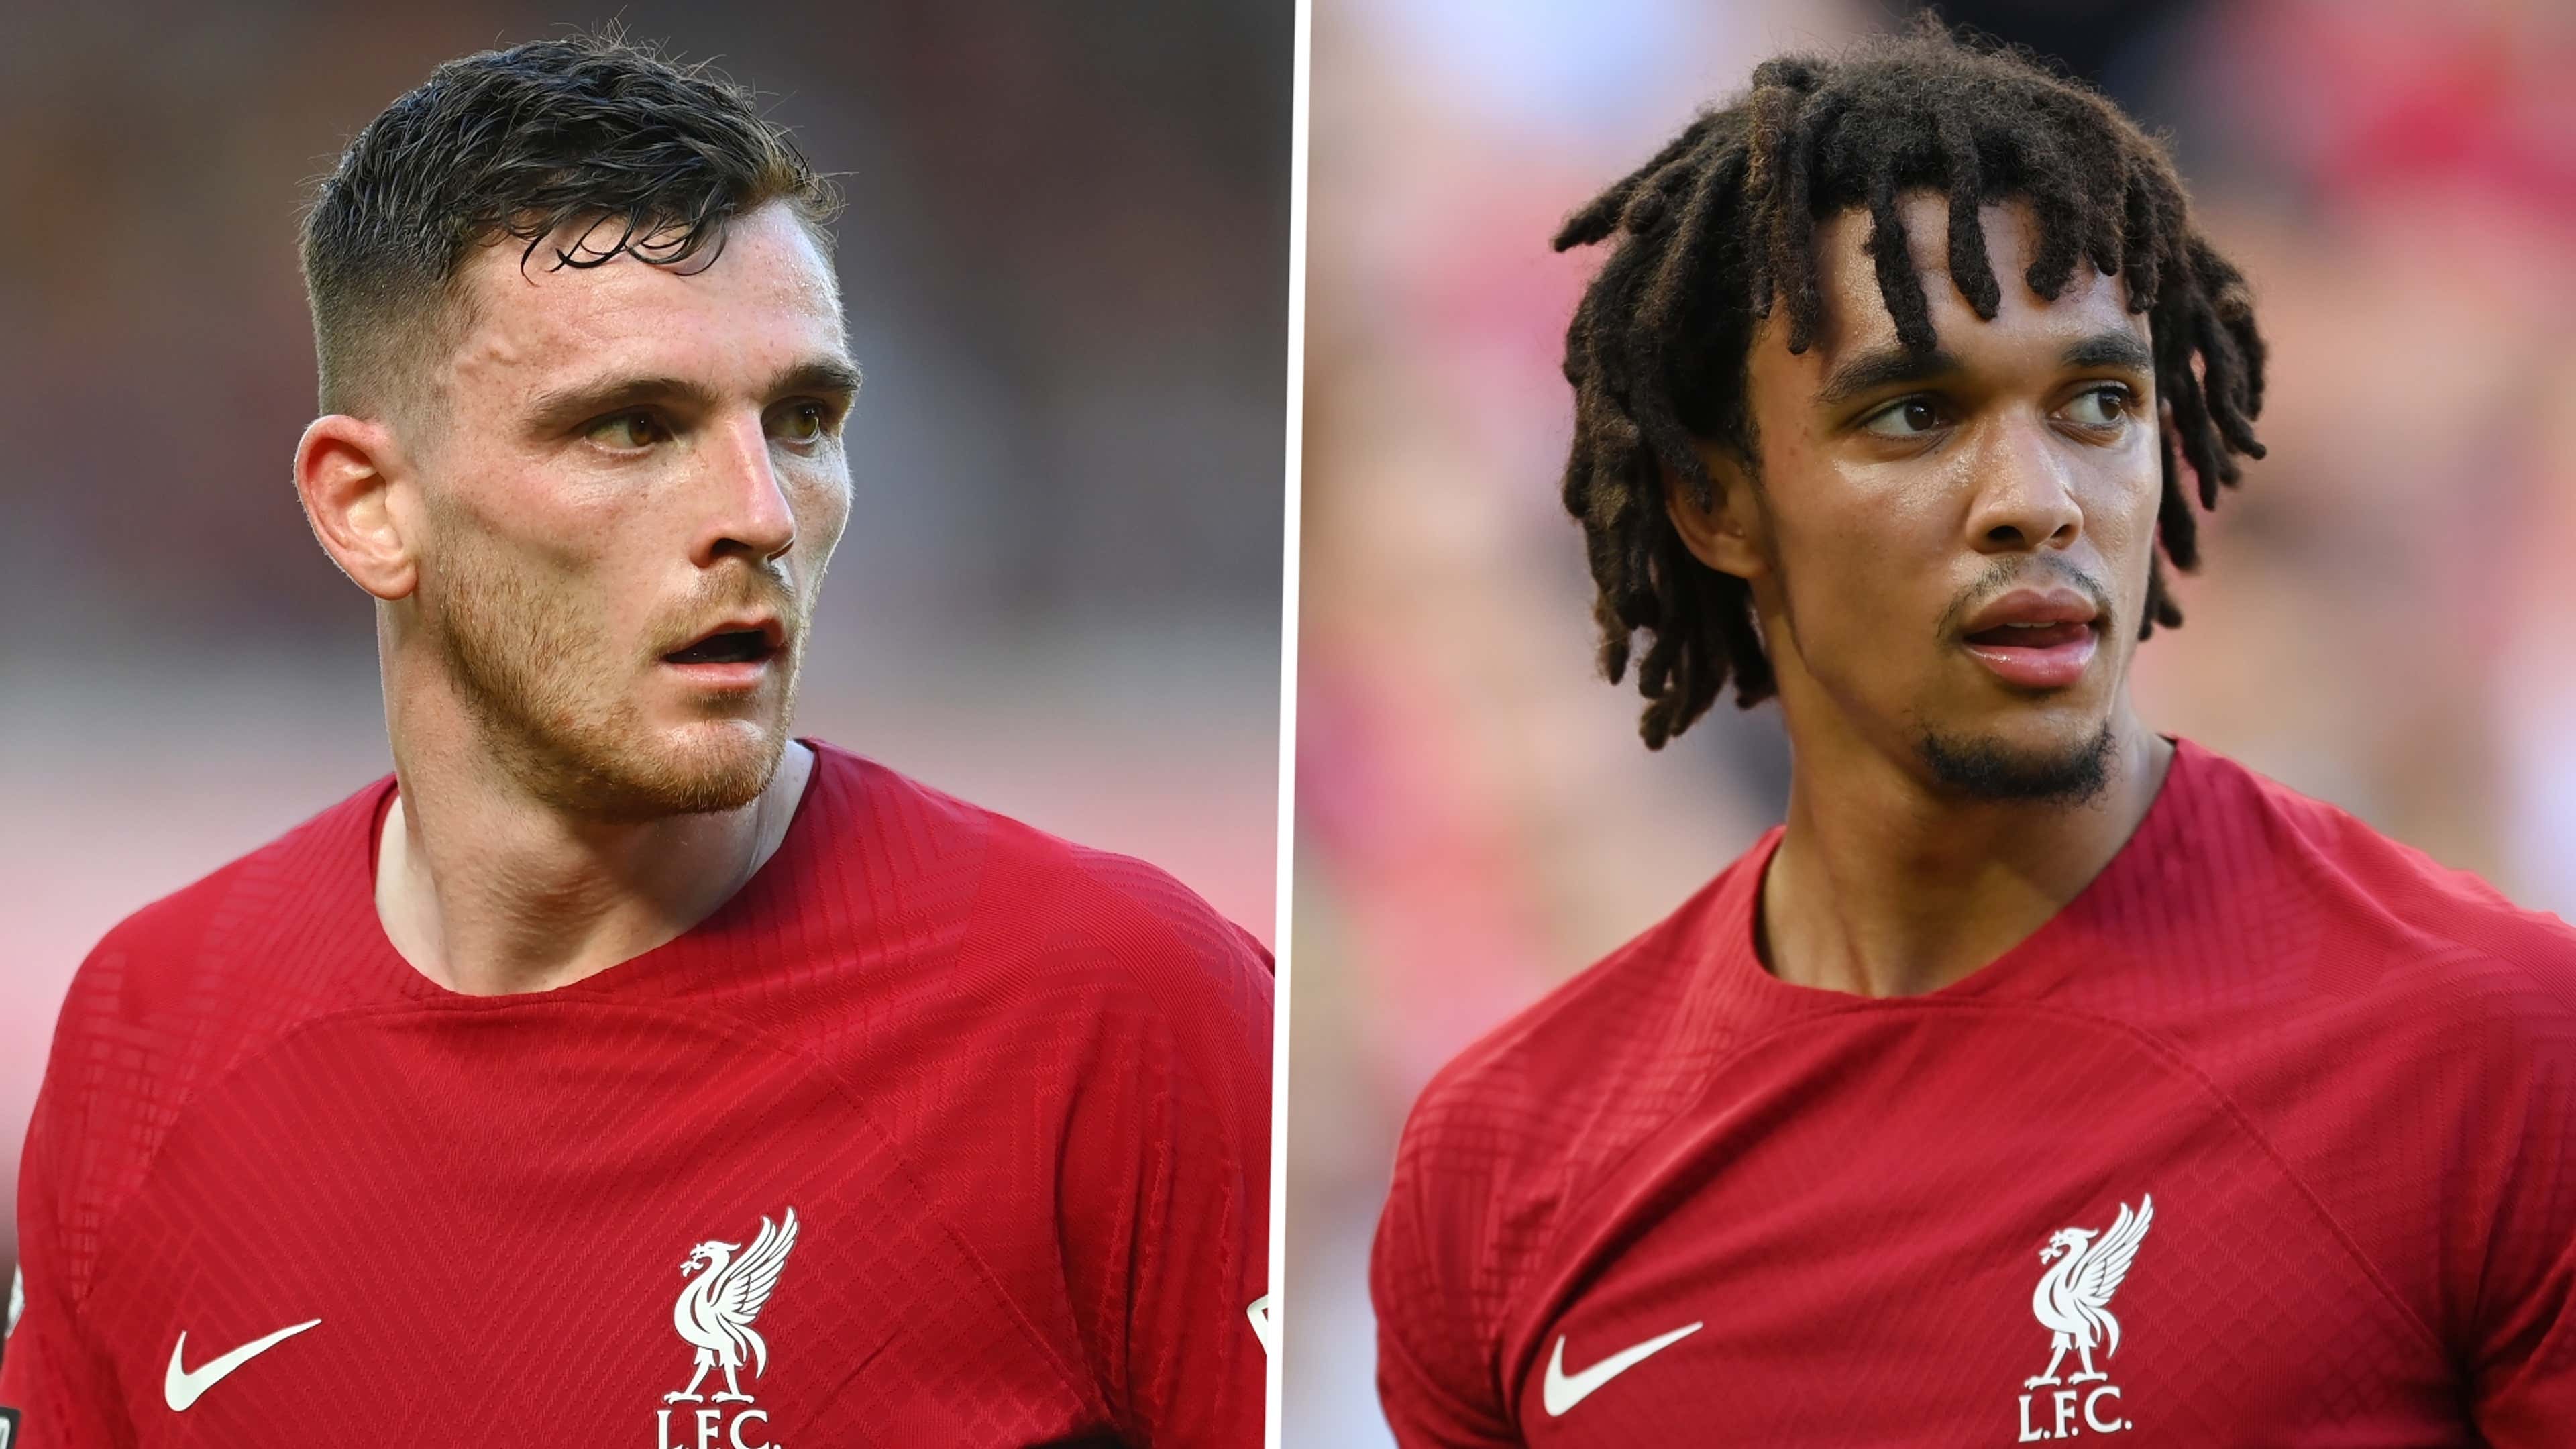 In good shape' - Hendo and Robbo assess win over Man City - Liverpool FC